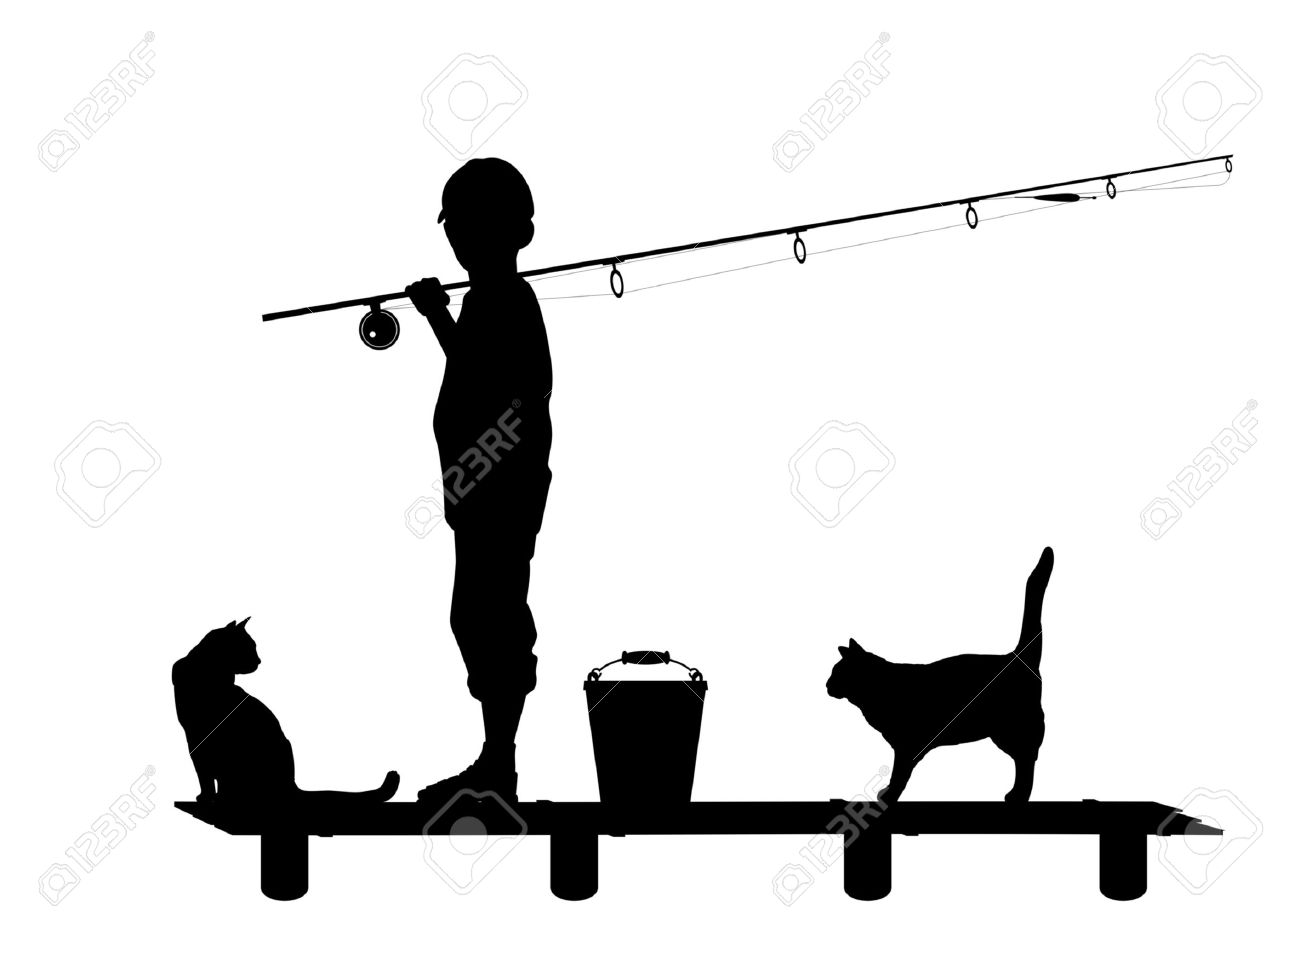 Silhouette Of The Child With A Fishing Tackle On Wooden Planked.